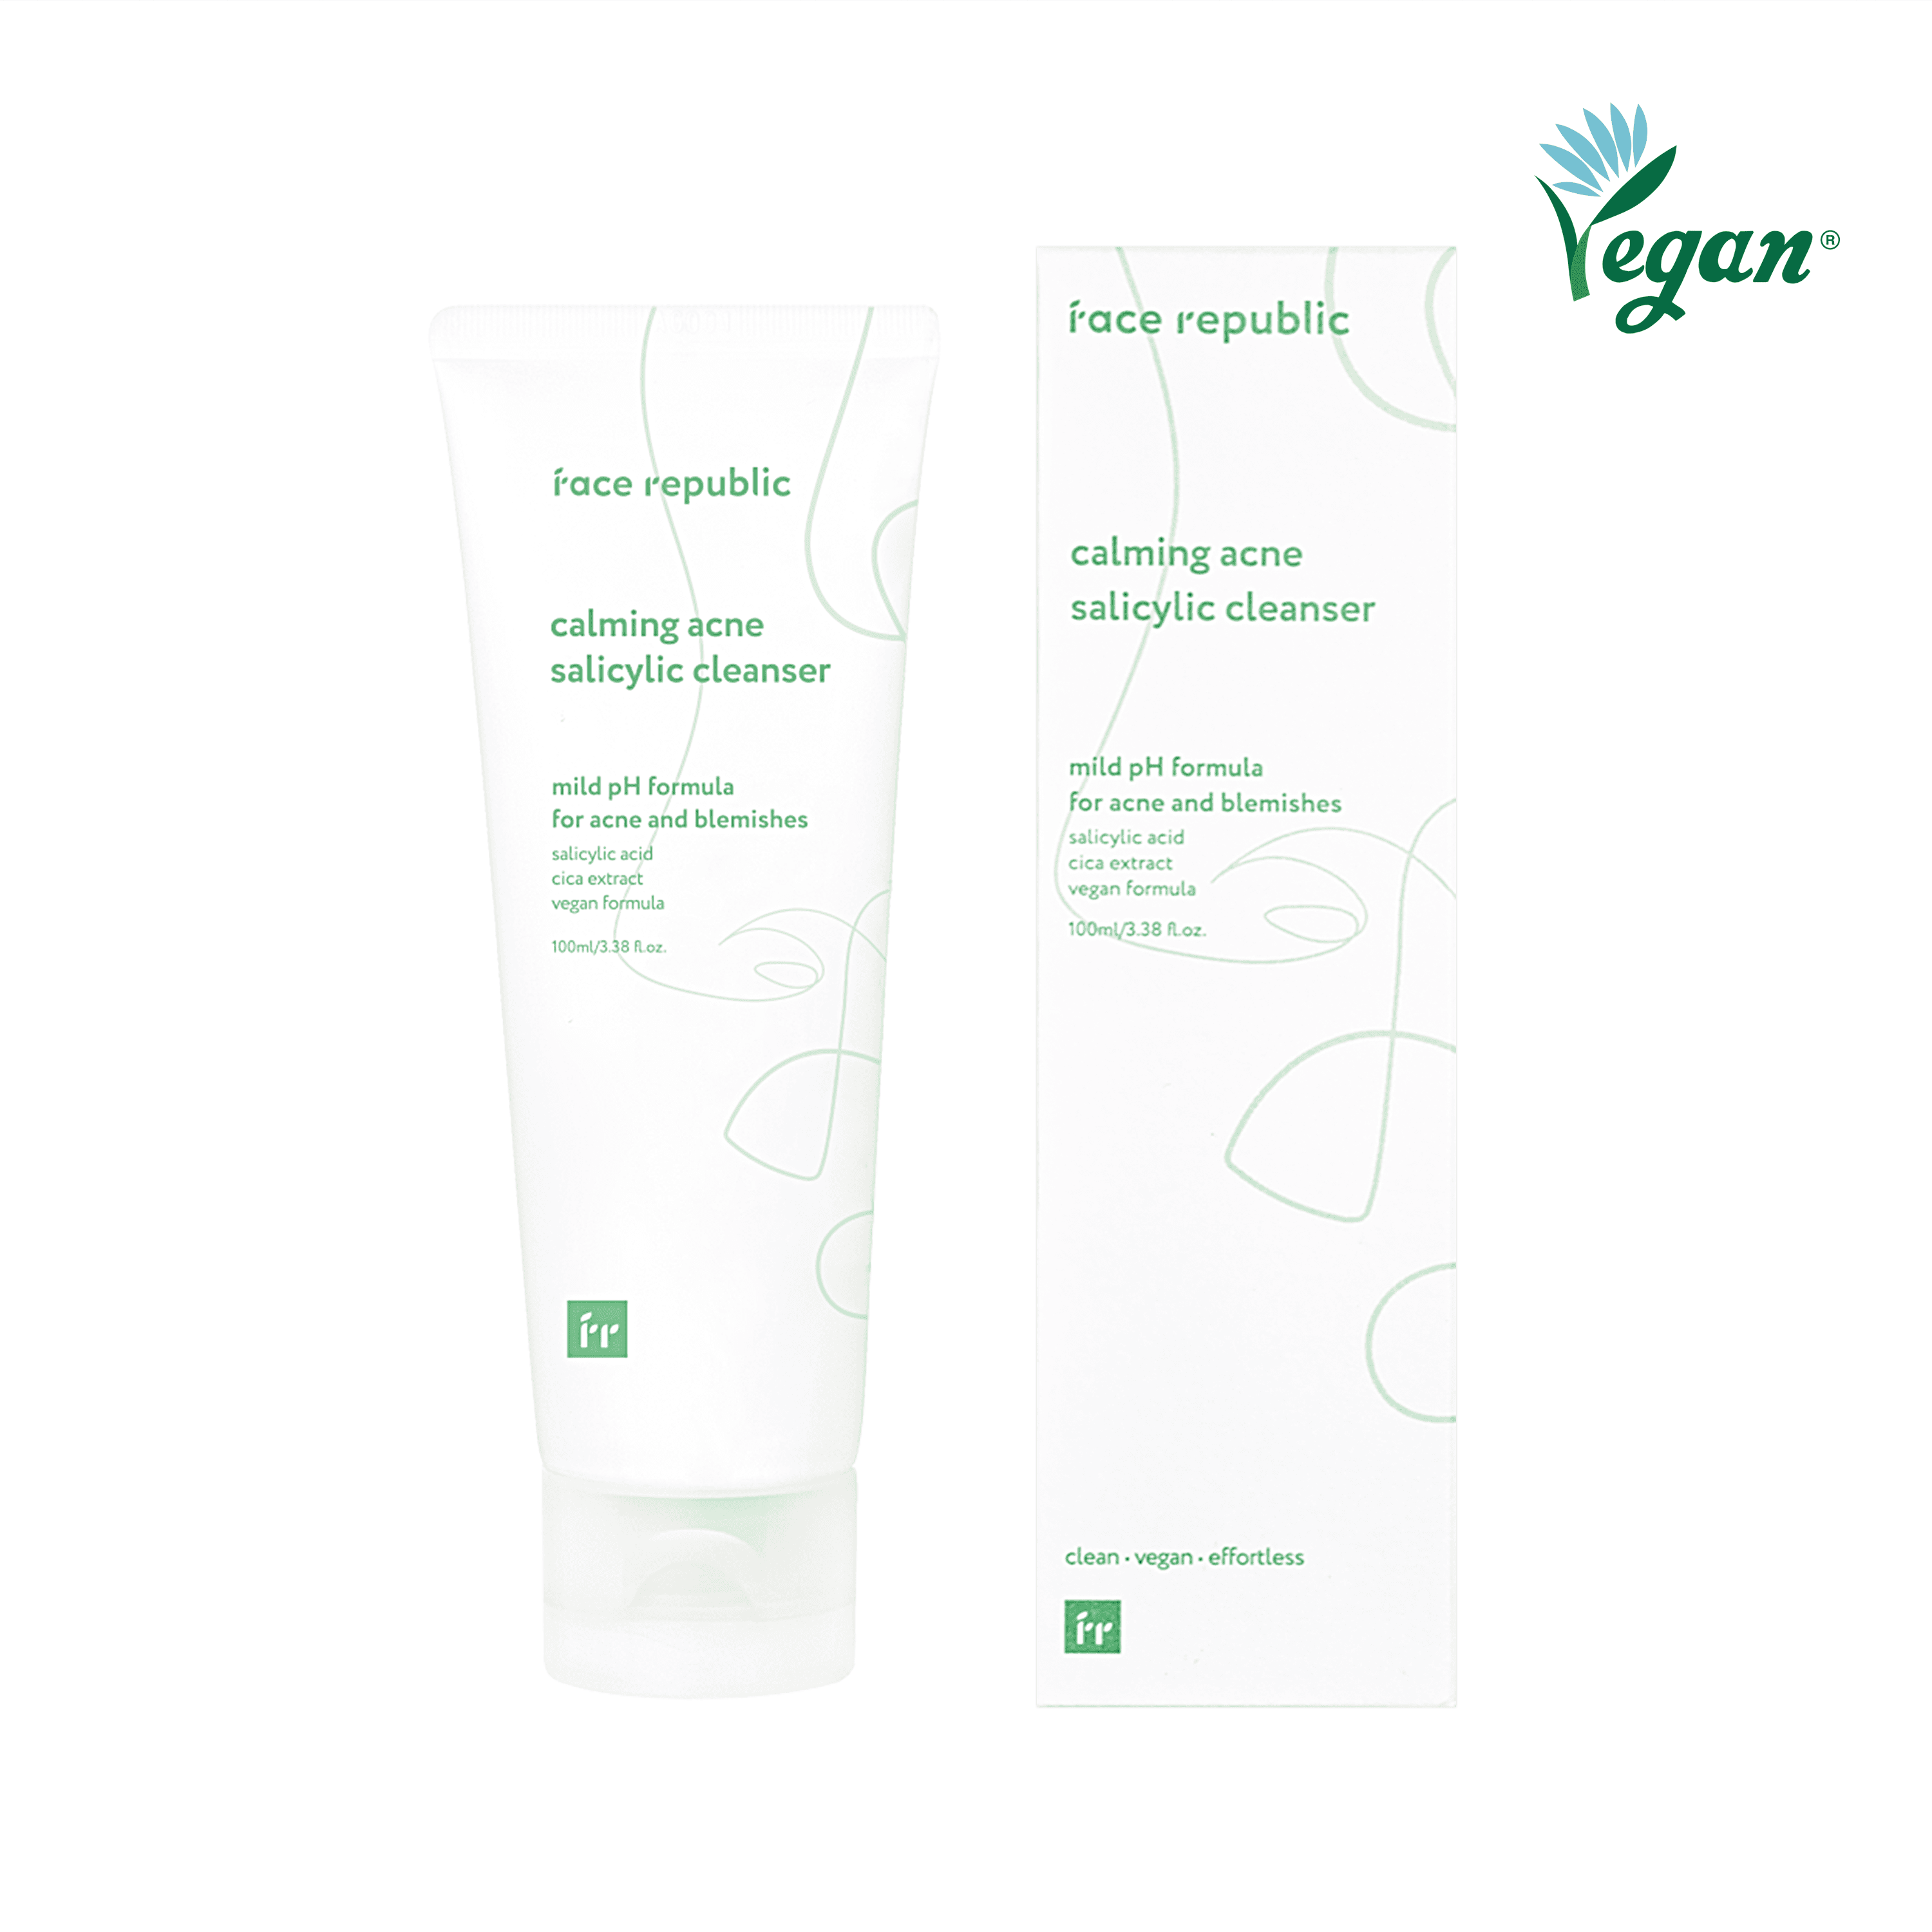 Calming Acne Salicylic Cleanser